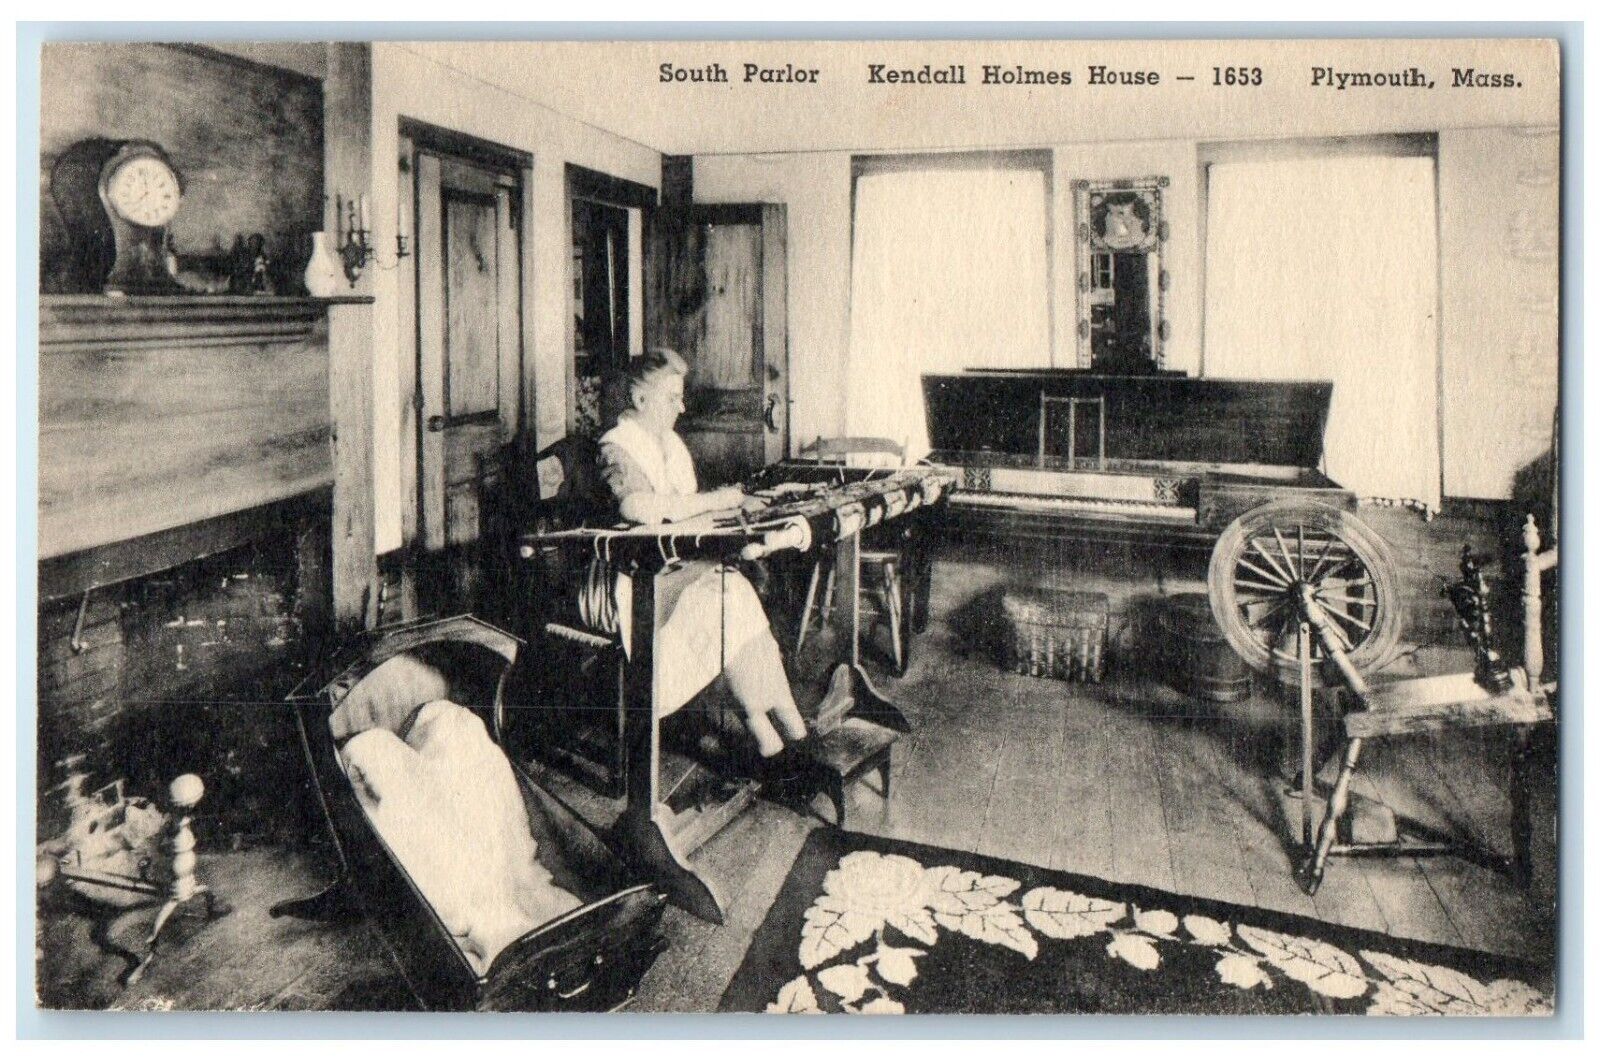 c1910 South Parlor Kendall Holmes House Interior Plymouth Massachusetts Postcard